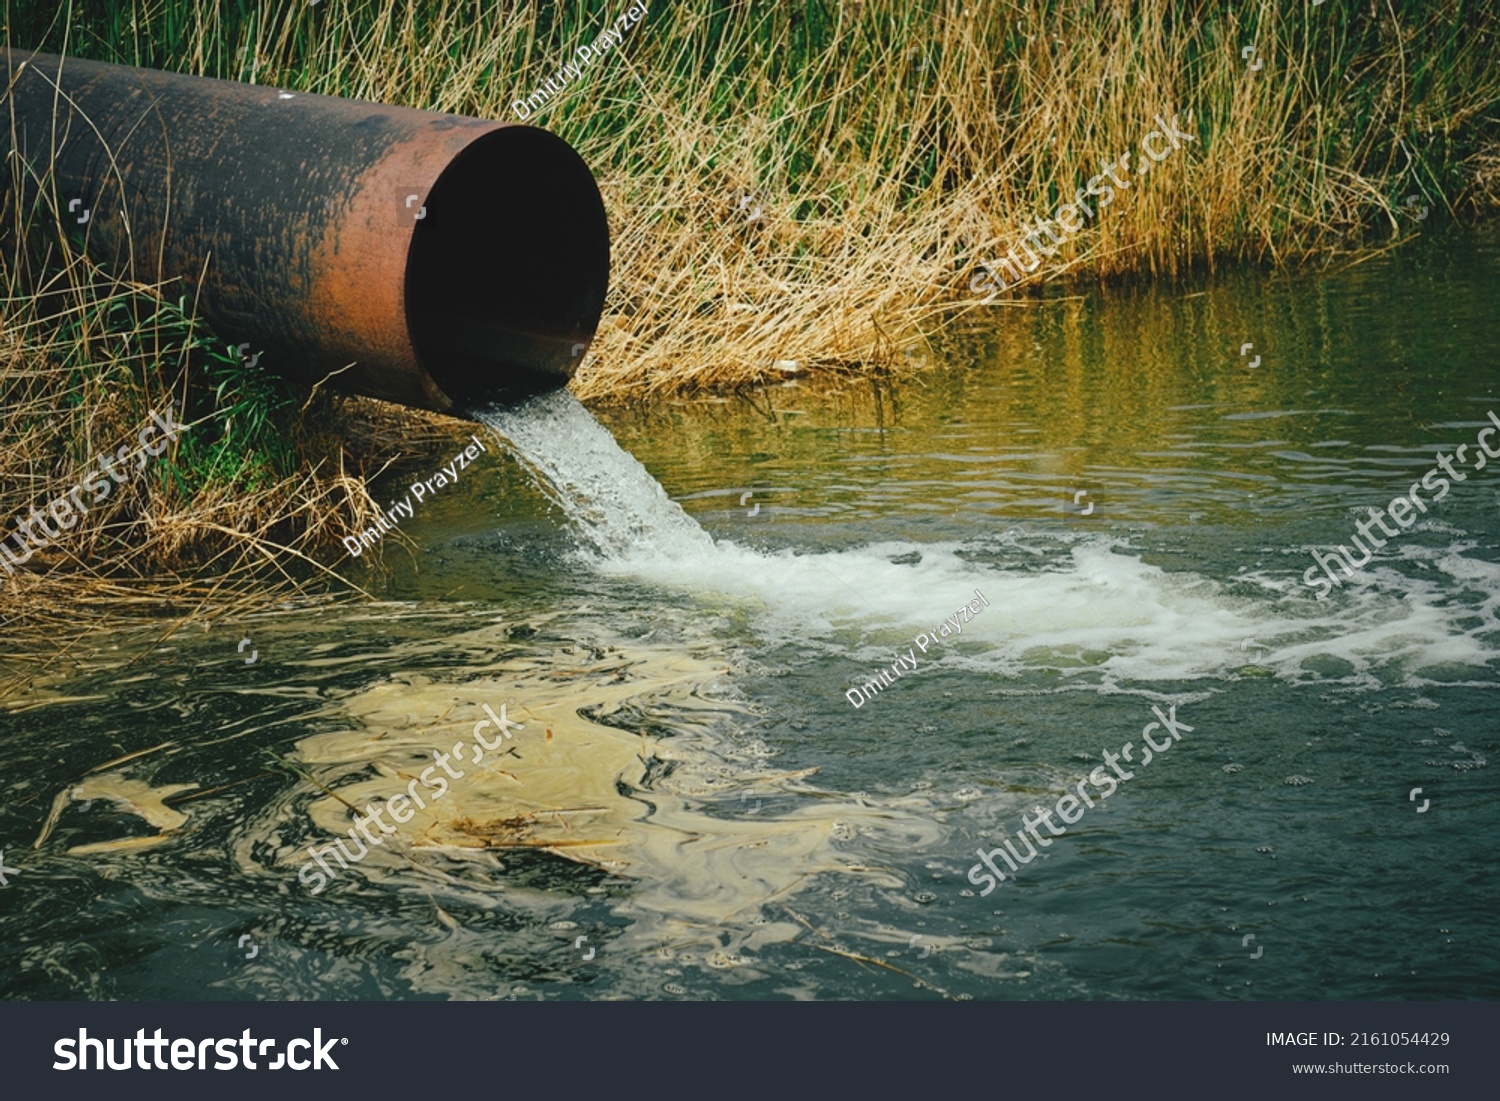 Draining sewage from pipe into river, pollution rivers and ecology #2161054429